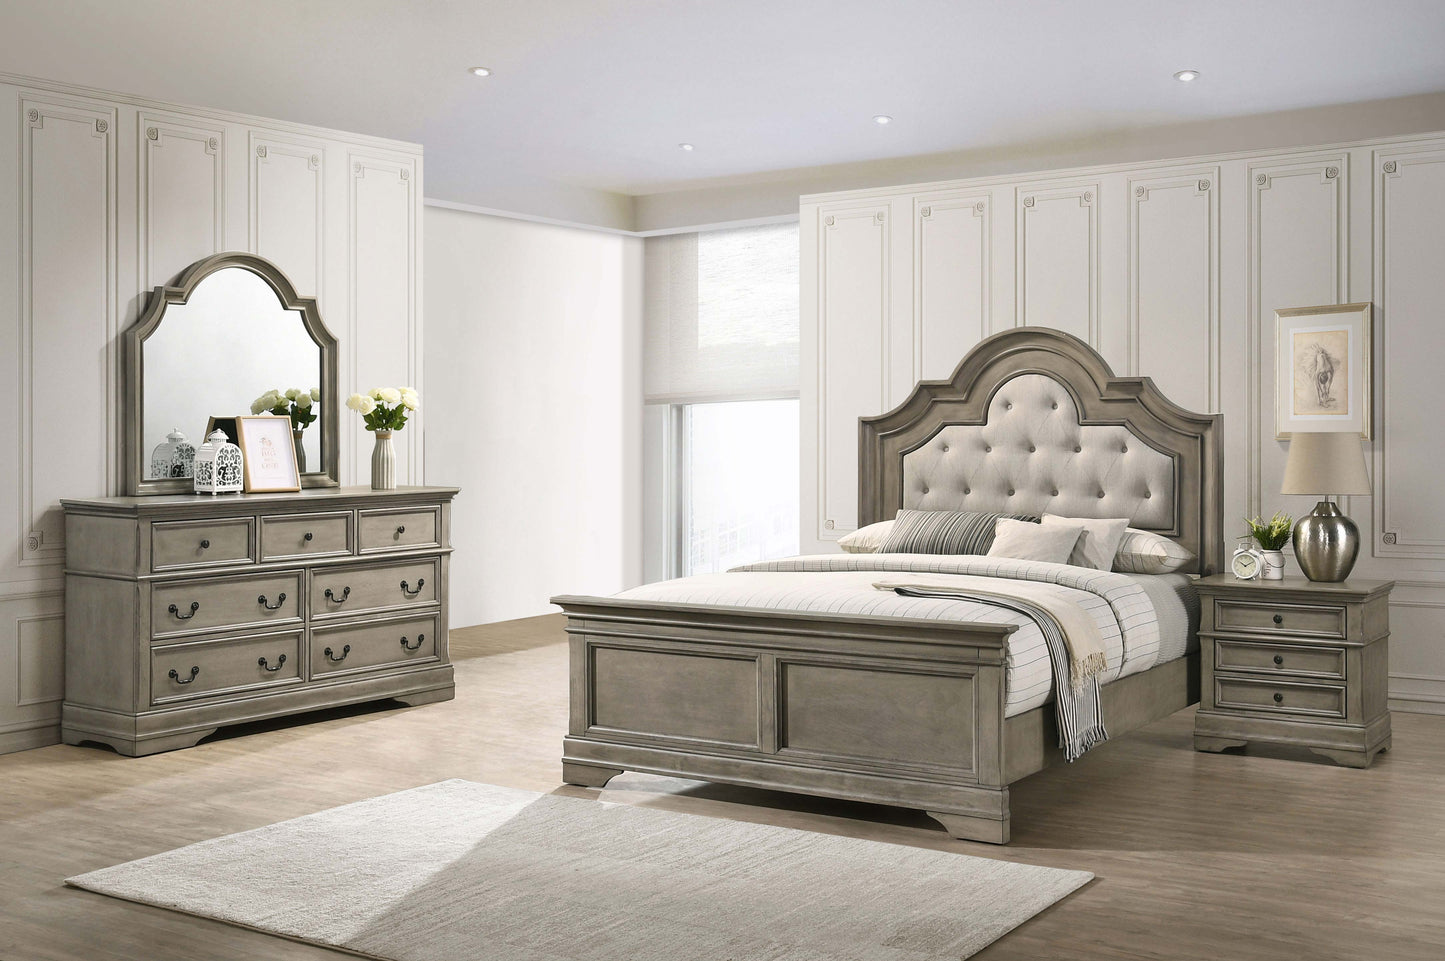 Manchester 4-piece California King Bedroom Set Wheat Brown